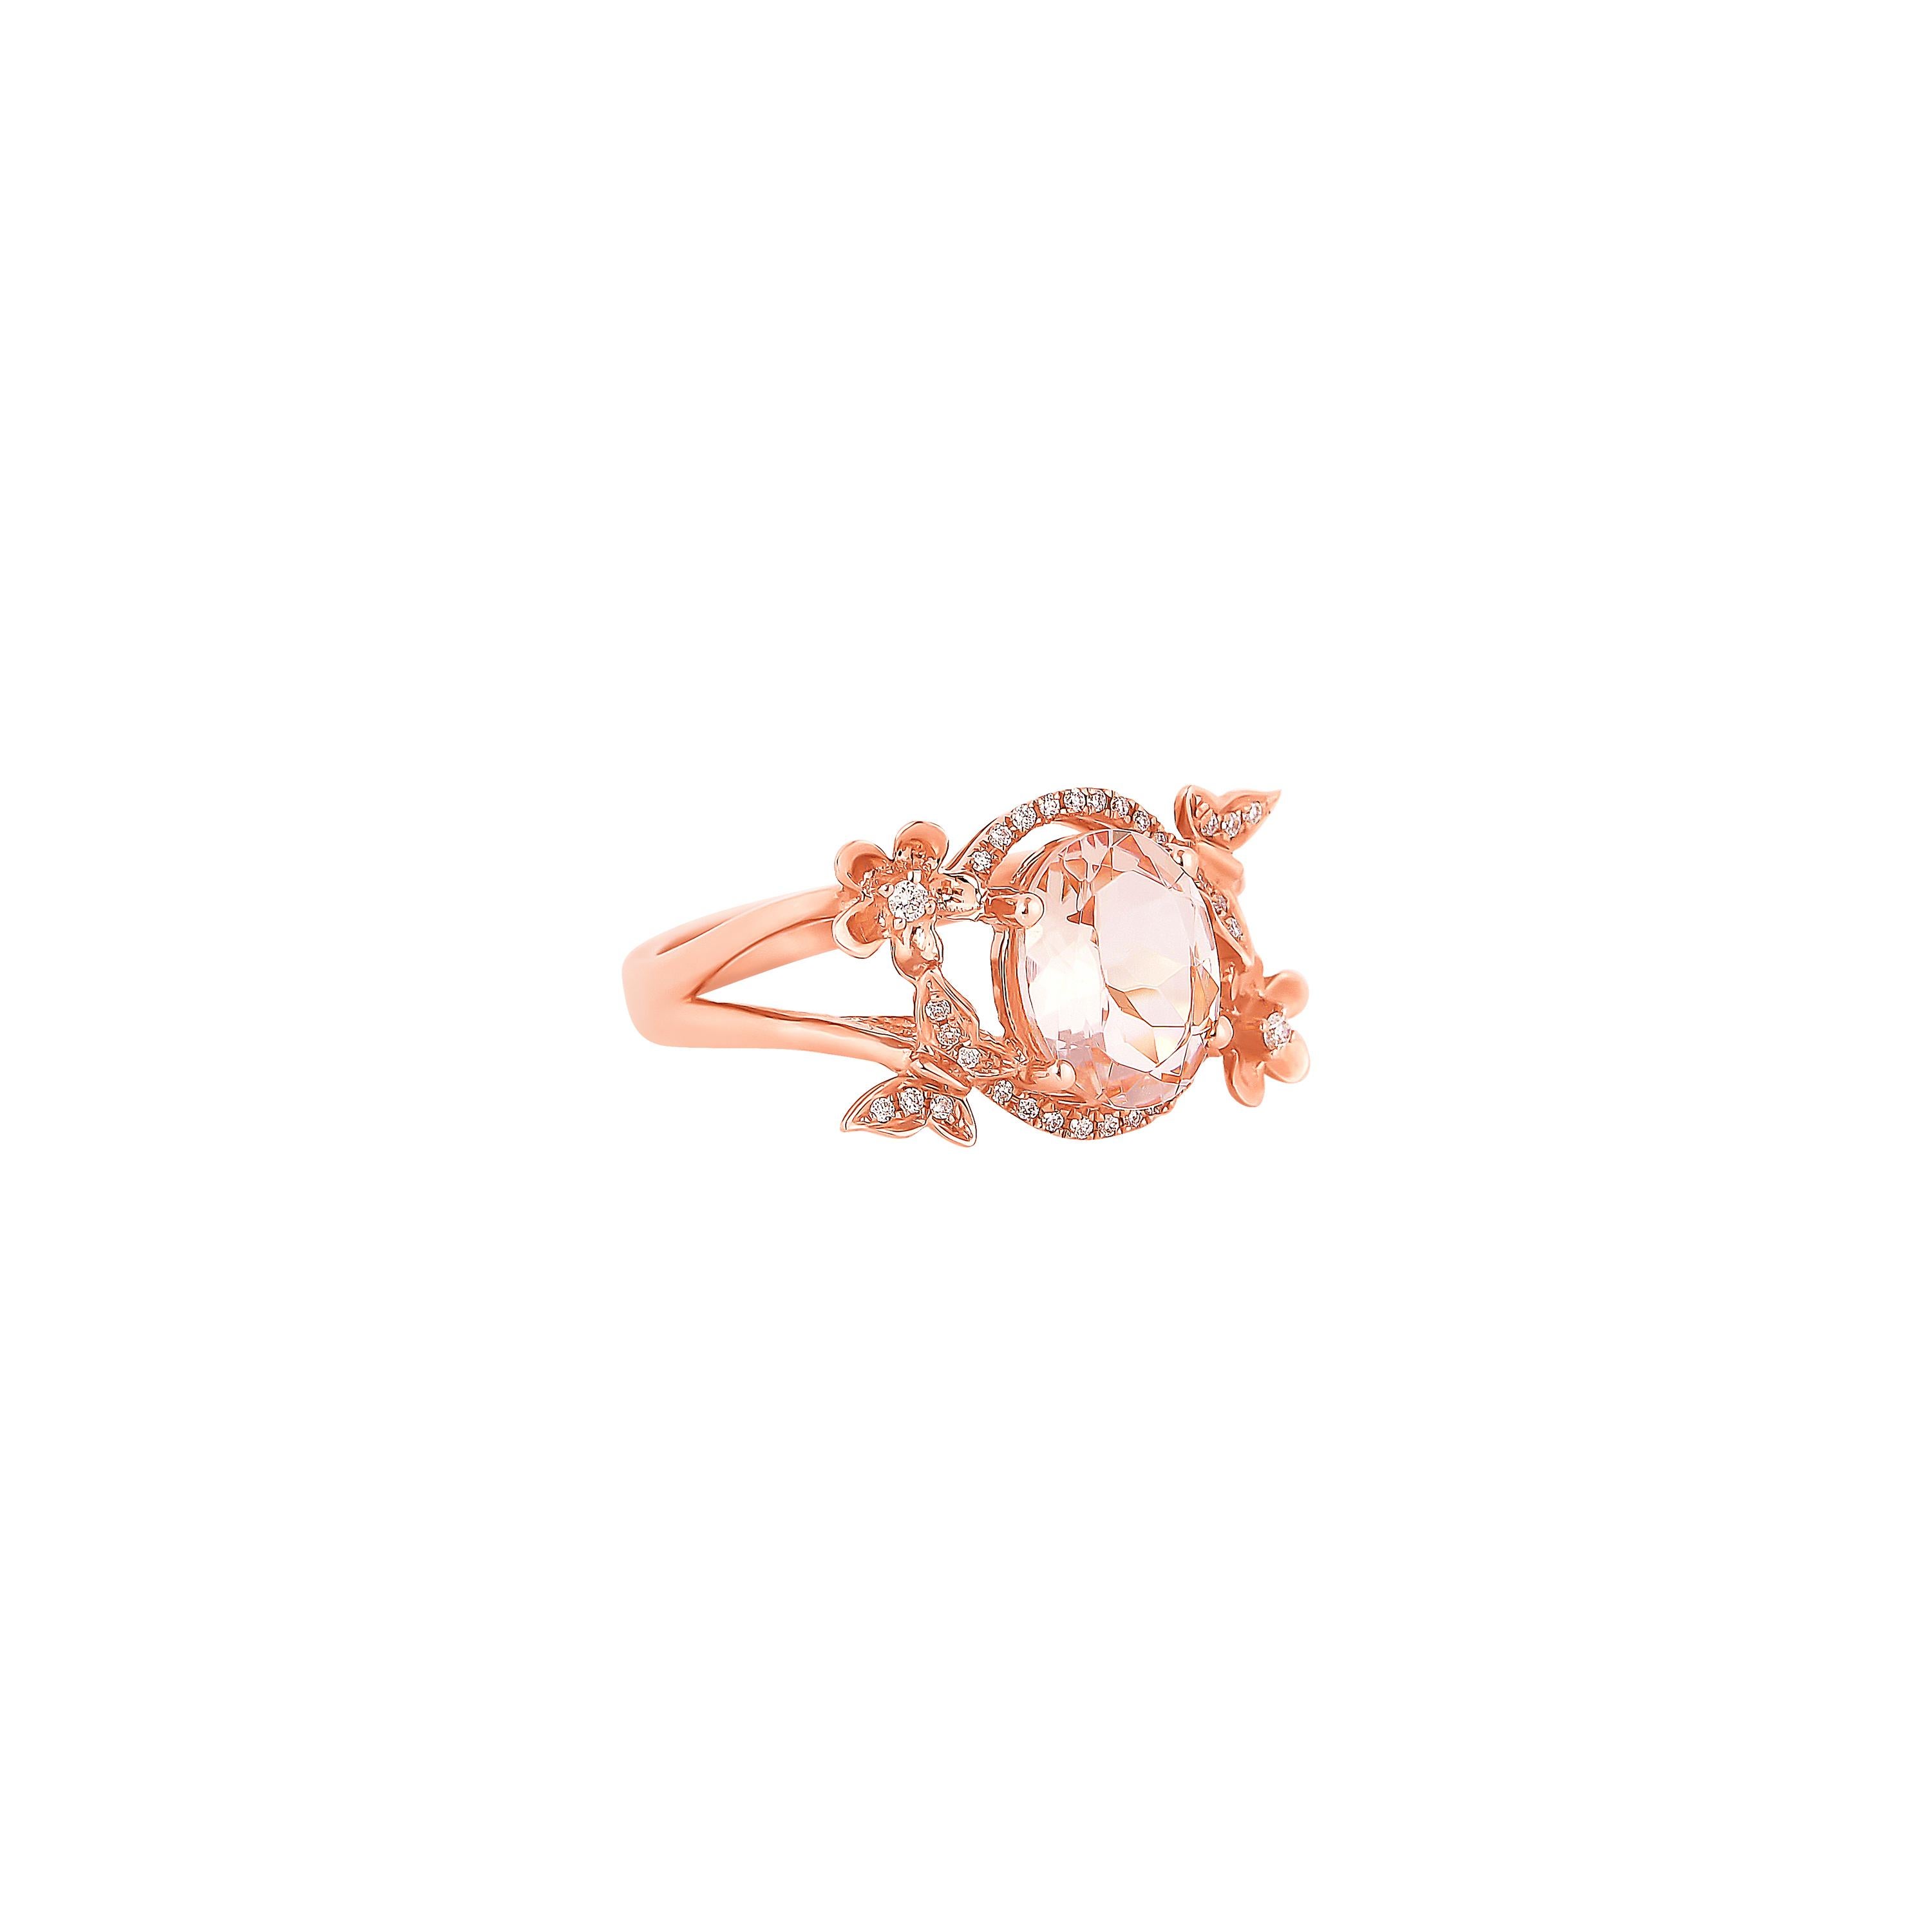 This collection features an array of magnificent morganites! Accented with Diamonds these rings are made in rose gold and present a classic yet elegant look. 

Classic morganite ring in 18K Rose gold with Diamond. 

Morganite: 1.47 carat, 9X7mm